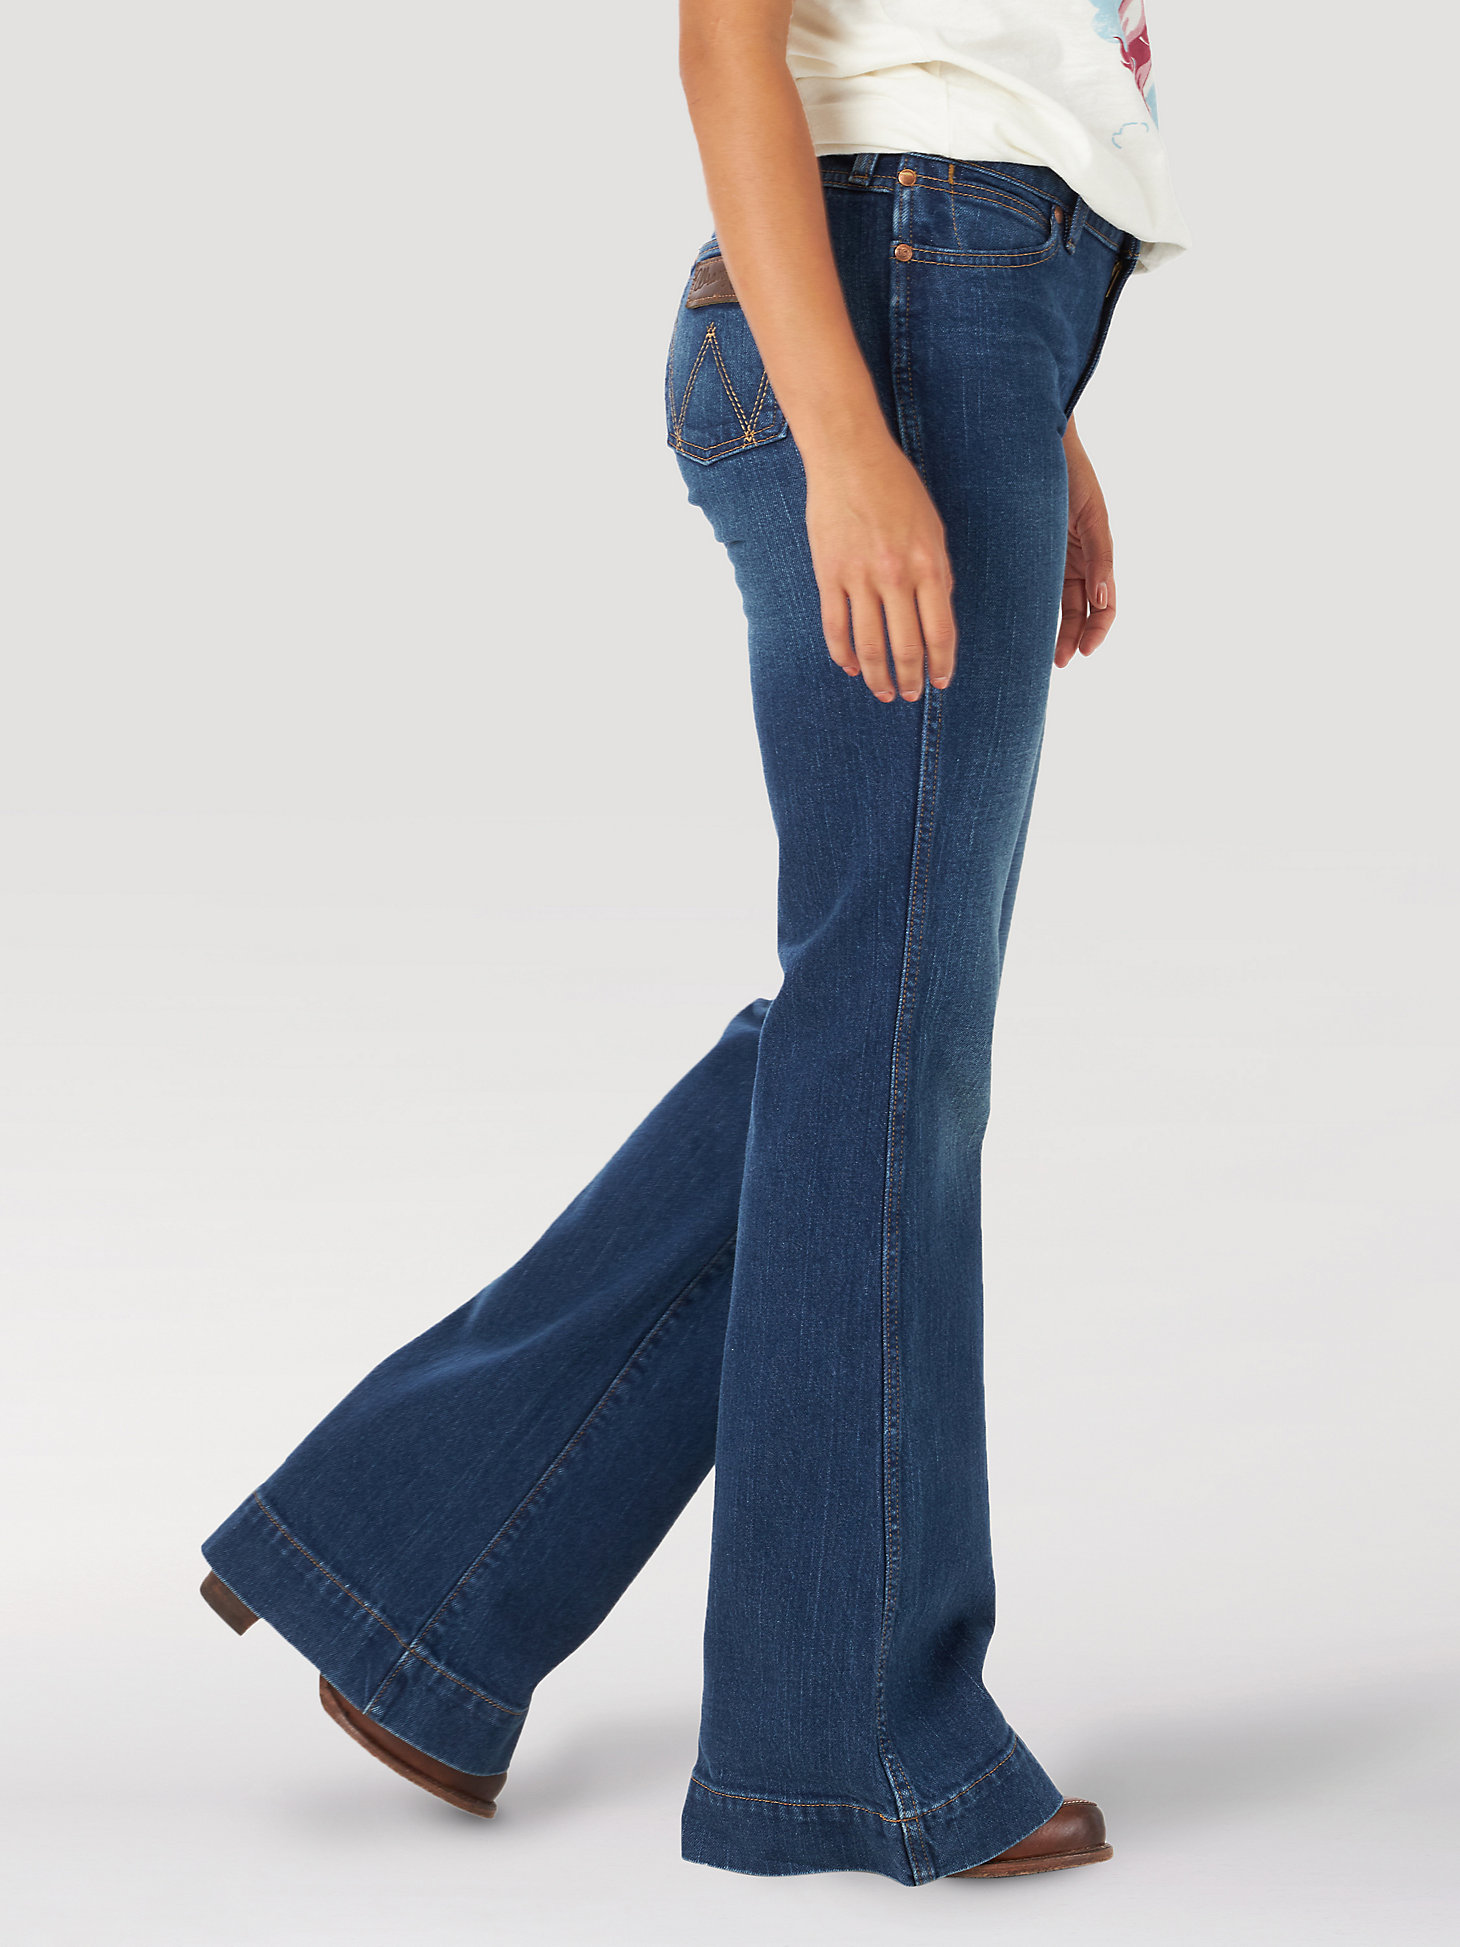 Women's Wrangler Rooted Collection™ USA High Rise Trouser Jean in Blue alternative view 1